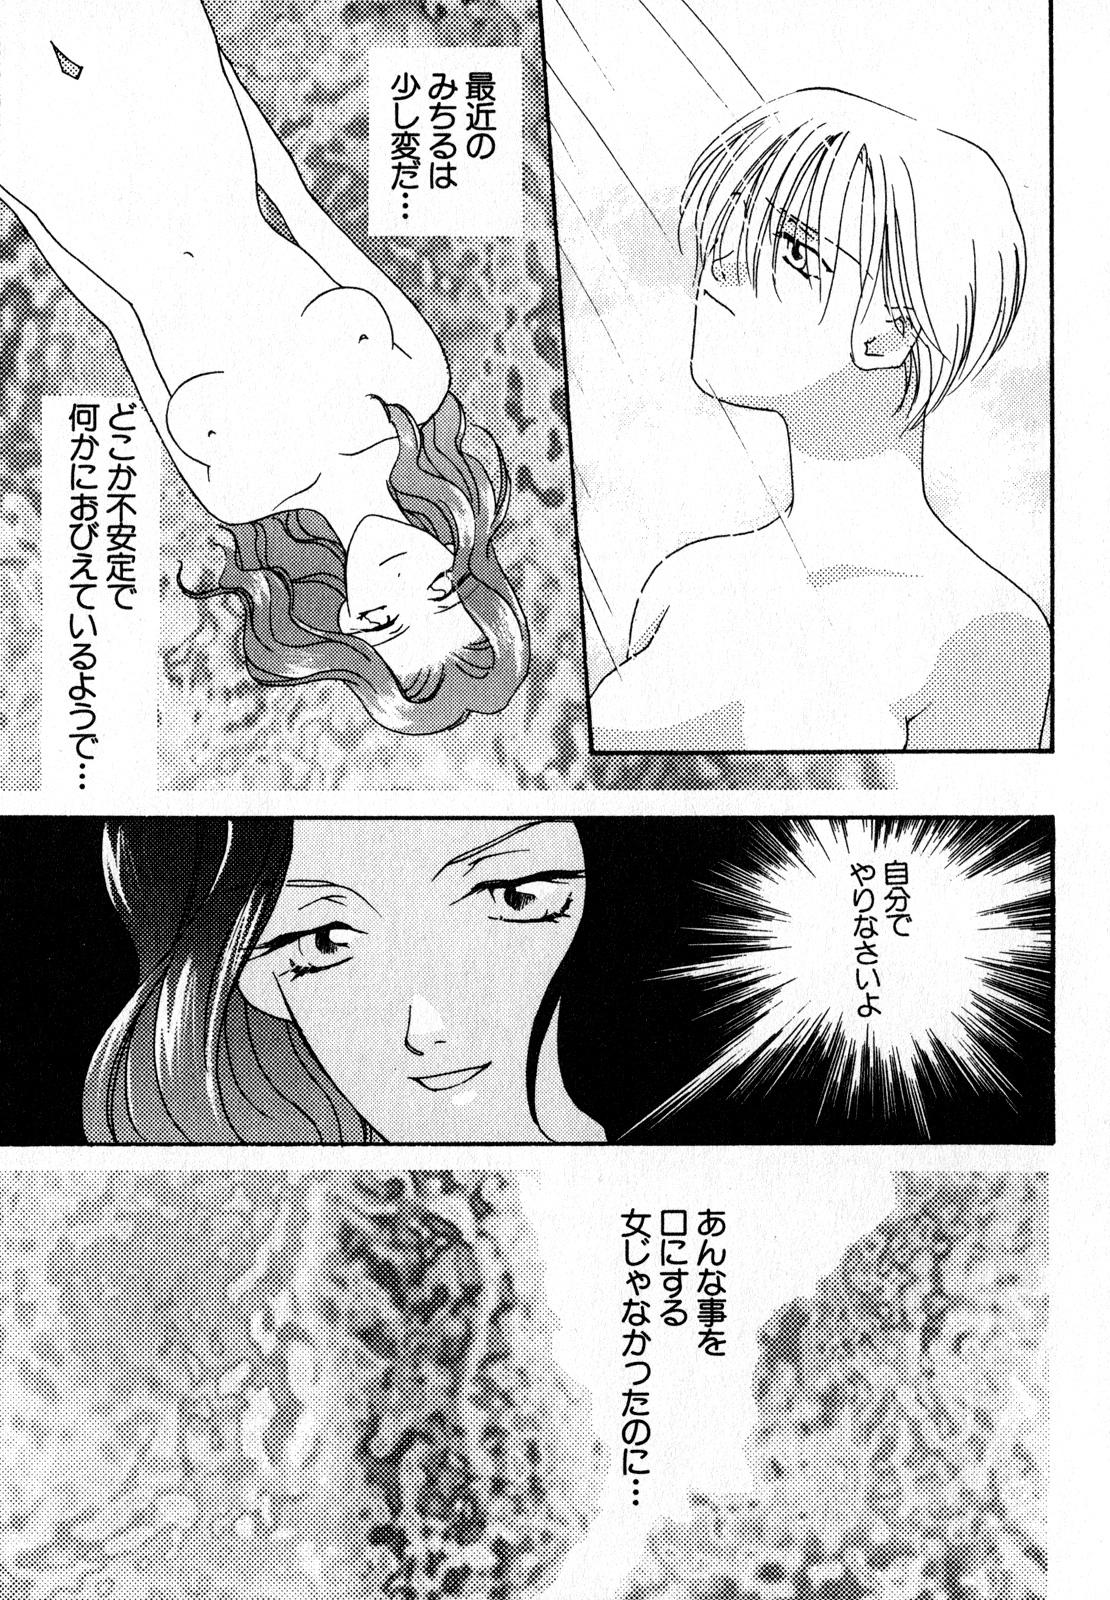 Solo Girl Lunatic Party 7 - Sailor moon Pattaya - Page 10